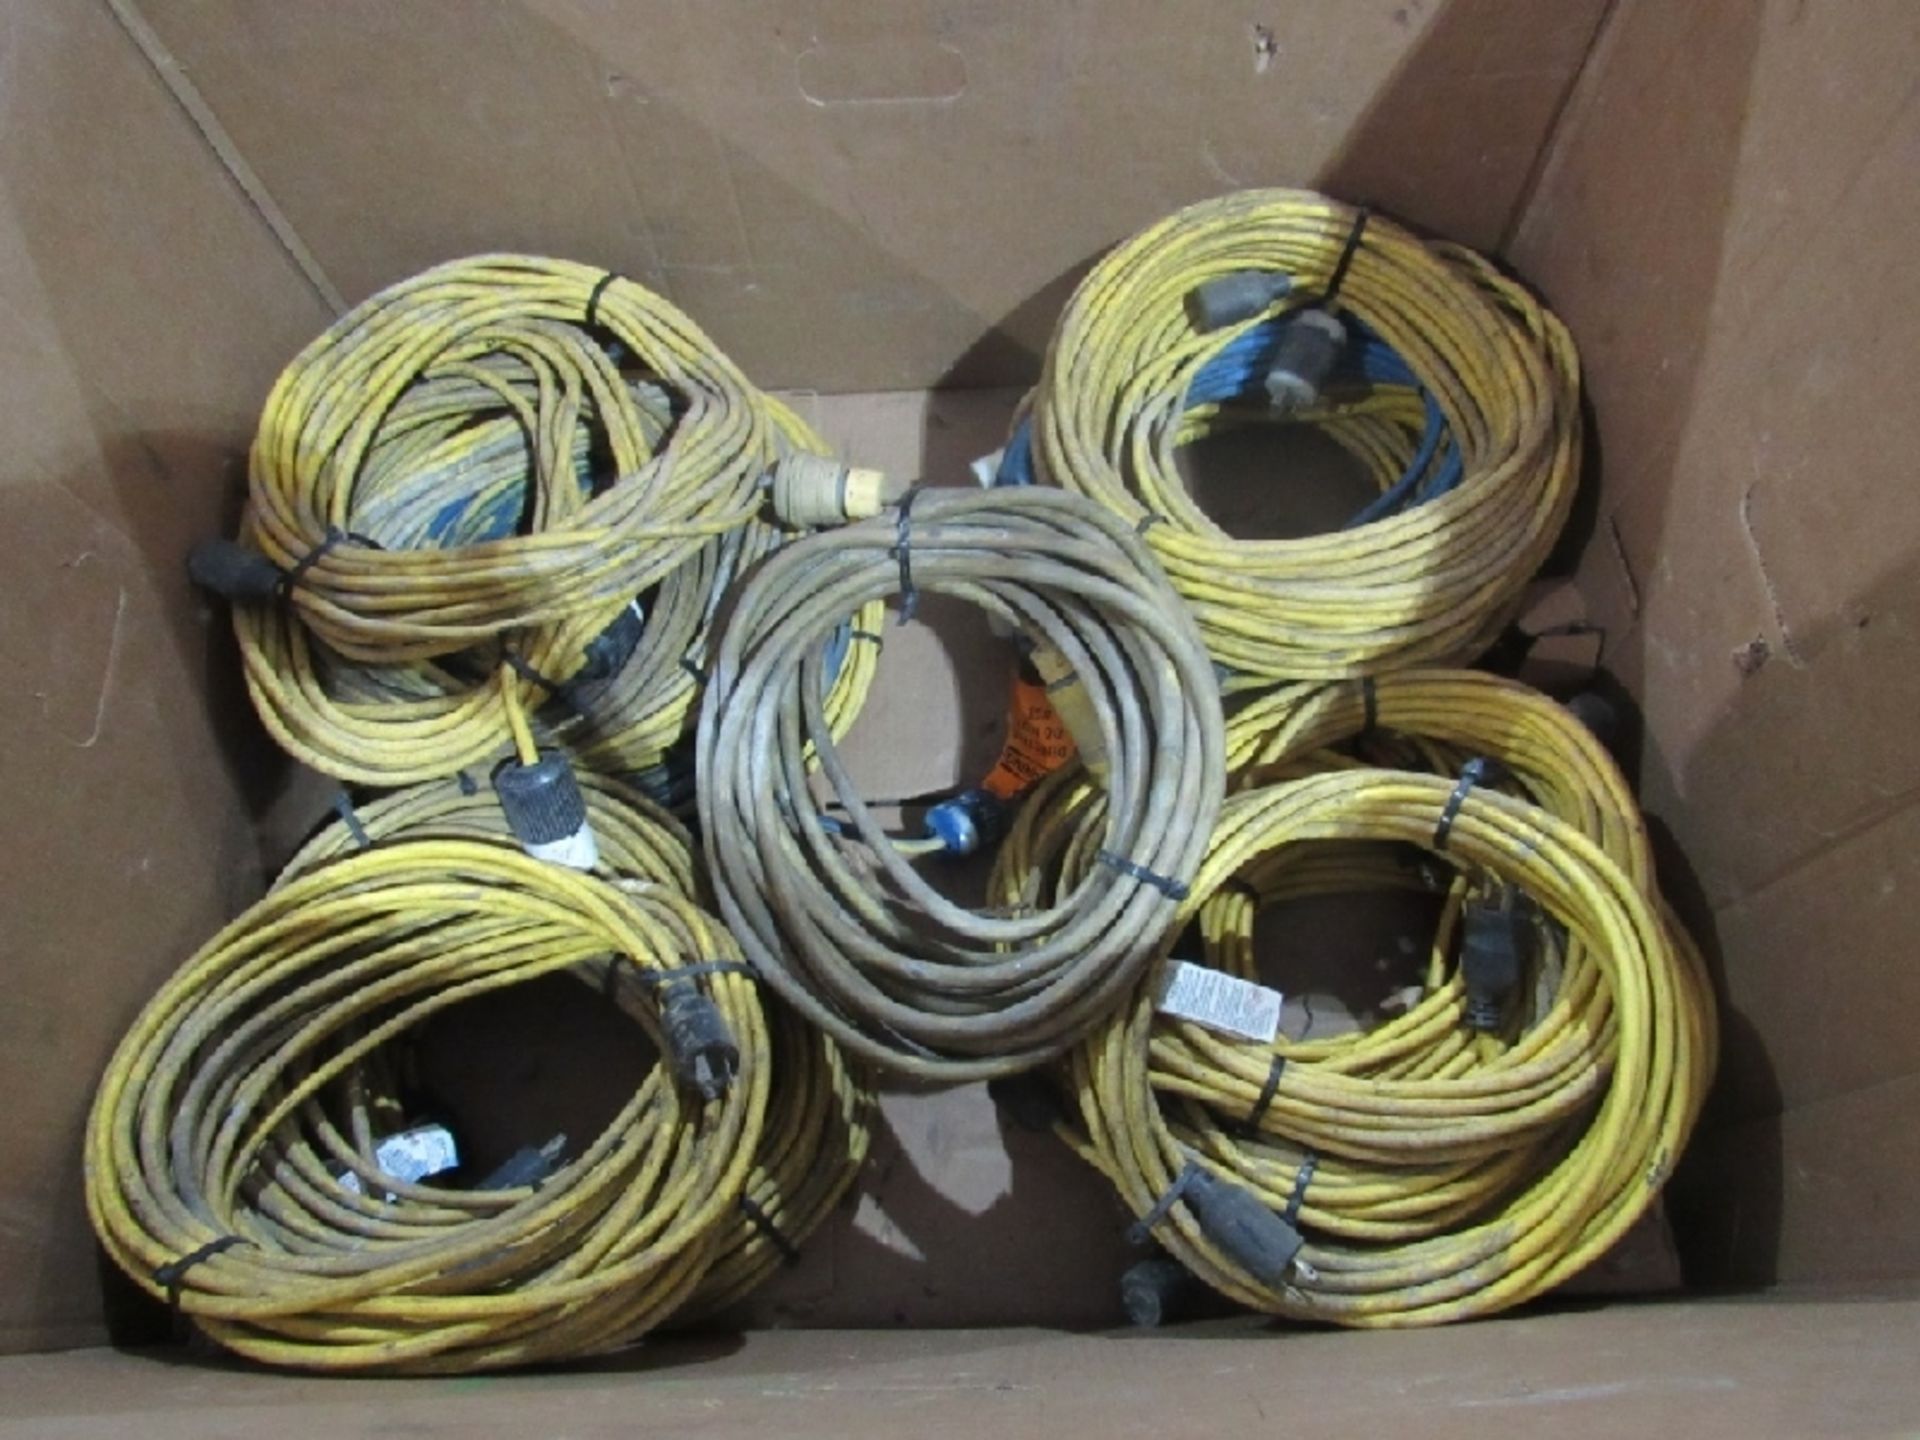 (qty - 25) Twist Lock Extension Cords- ***Located in Chattanooga, TN*** MFR - Unknown 10' to 20'